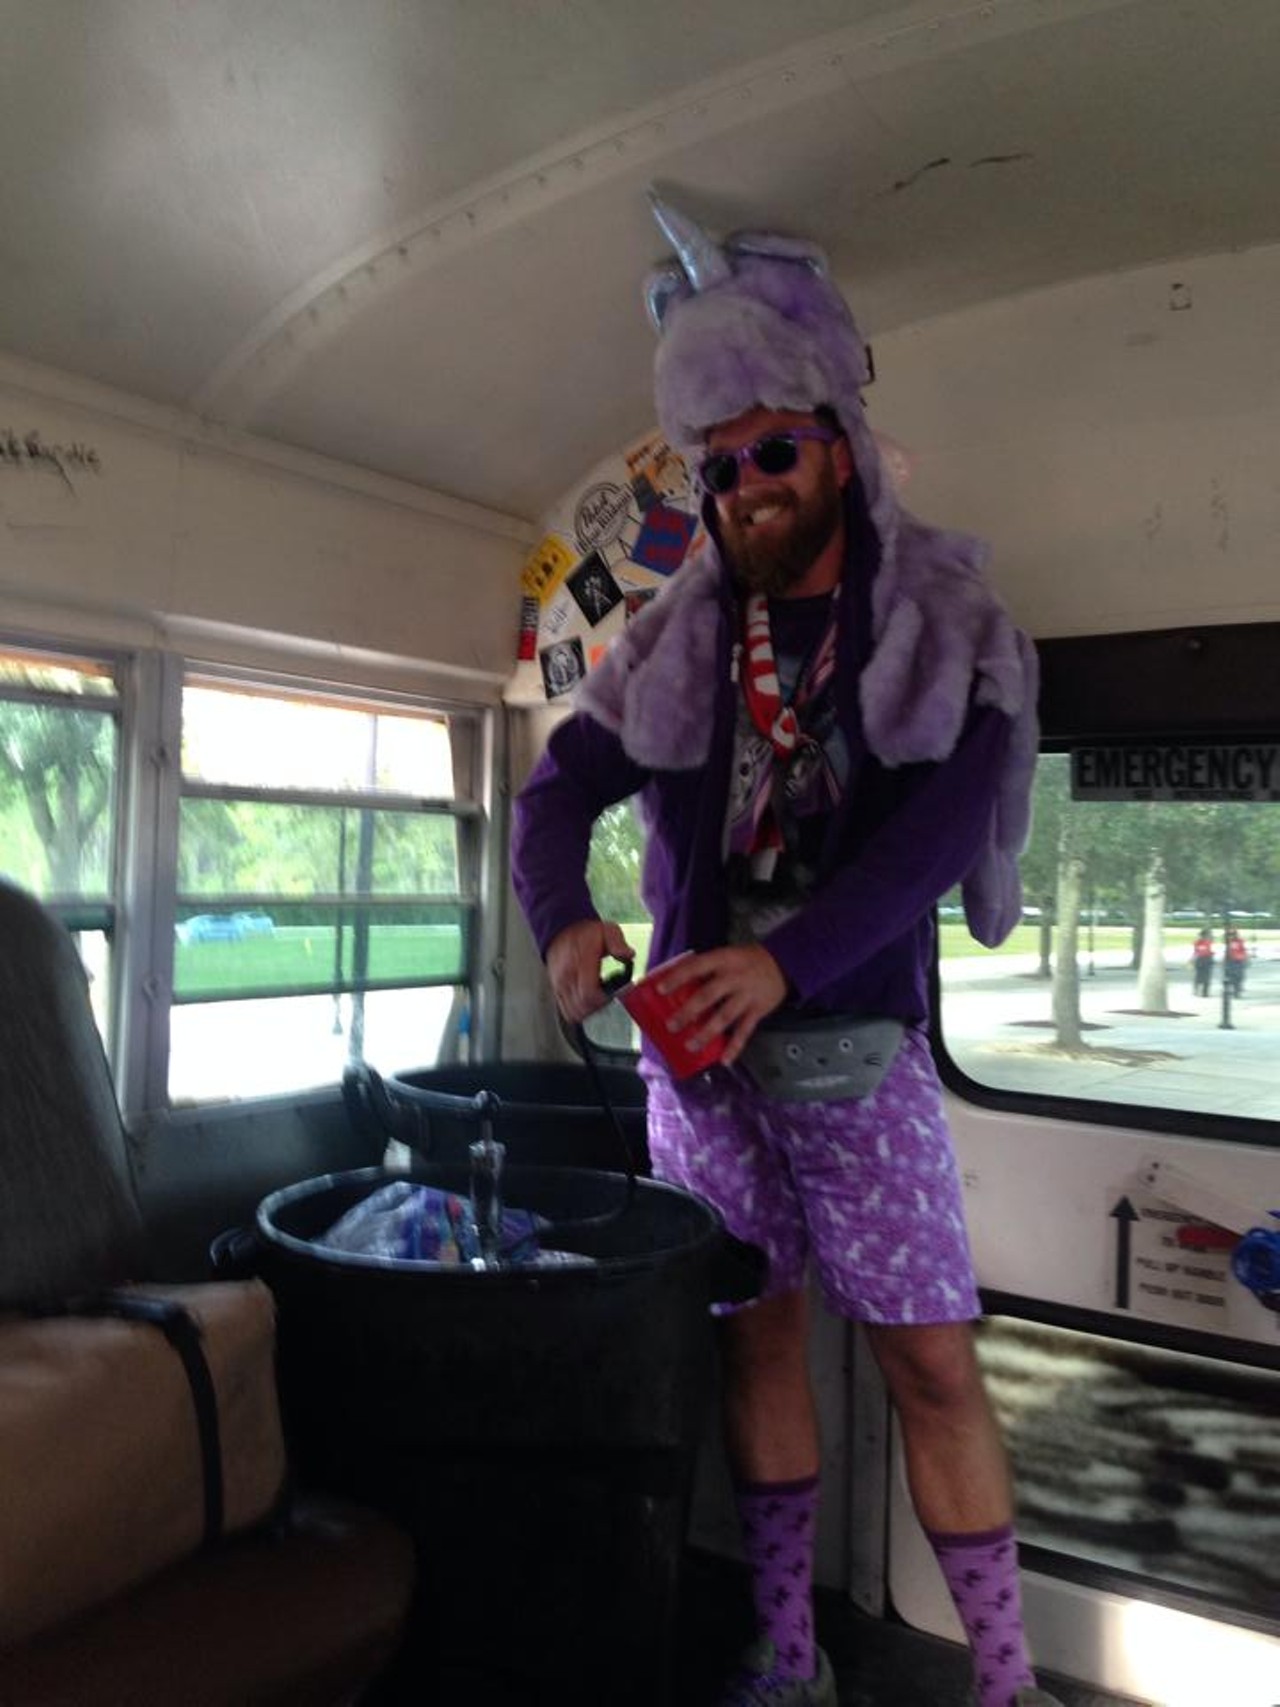 Riding the Murder City bus to see the Orlando City Soccer game on Saturday.